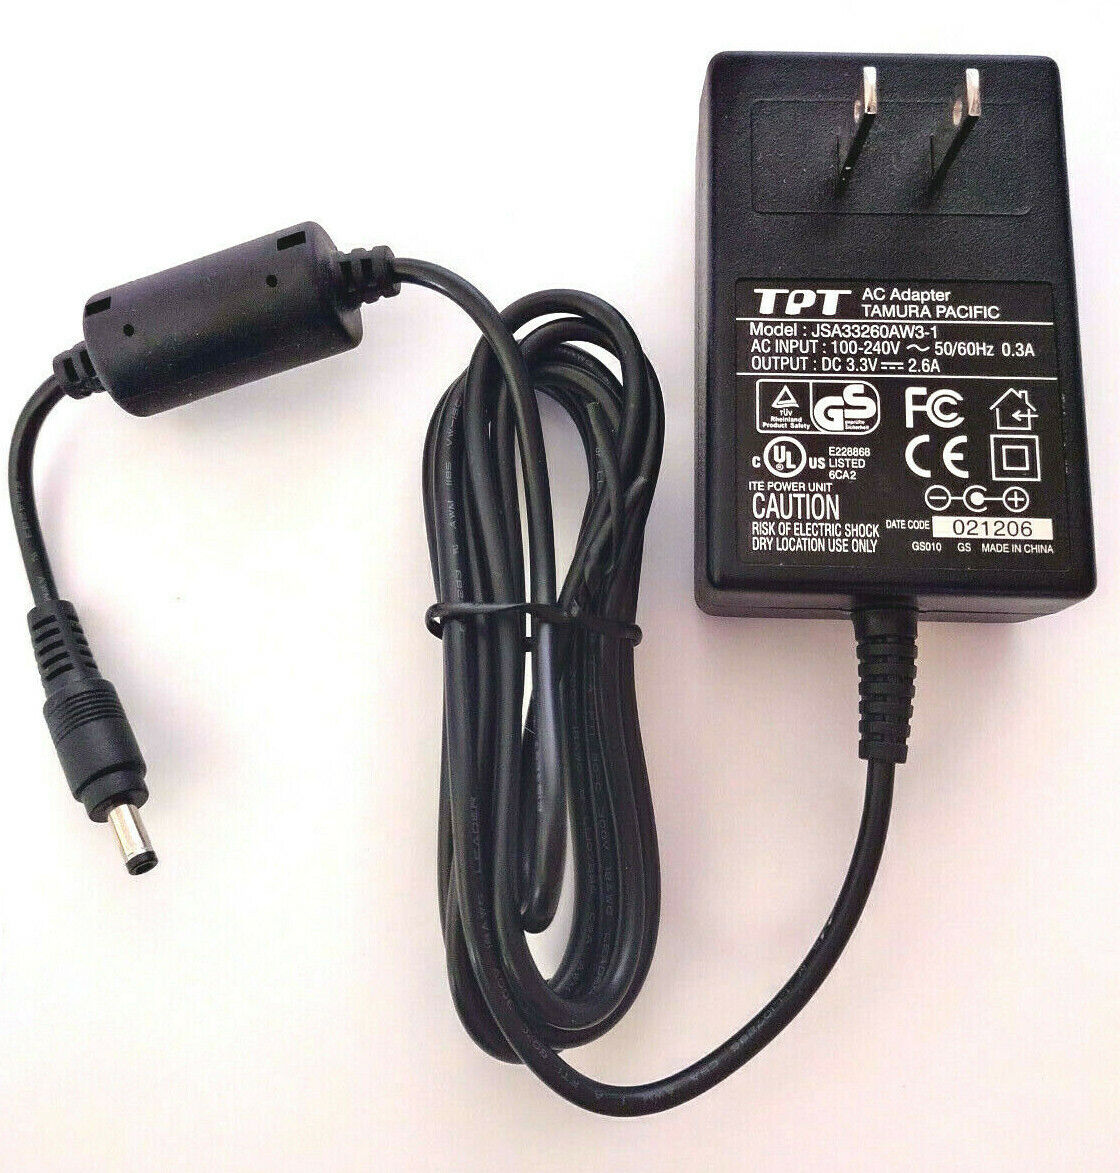 TPT JSA33260AW3-1 AC Adapter DC 3V 2.6 ITE Power Supply Transformer Charger Features: Powered MPN: Does Not Apply